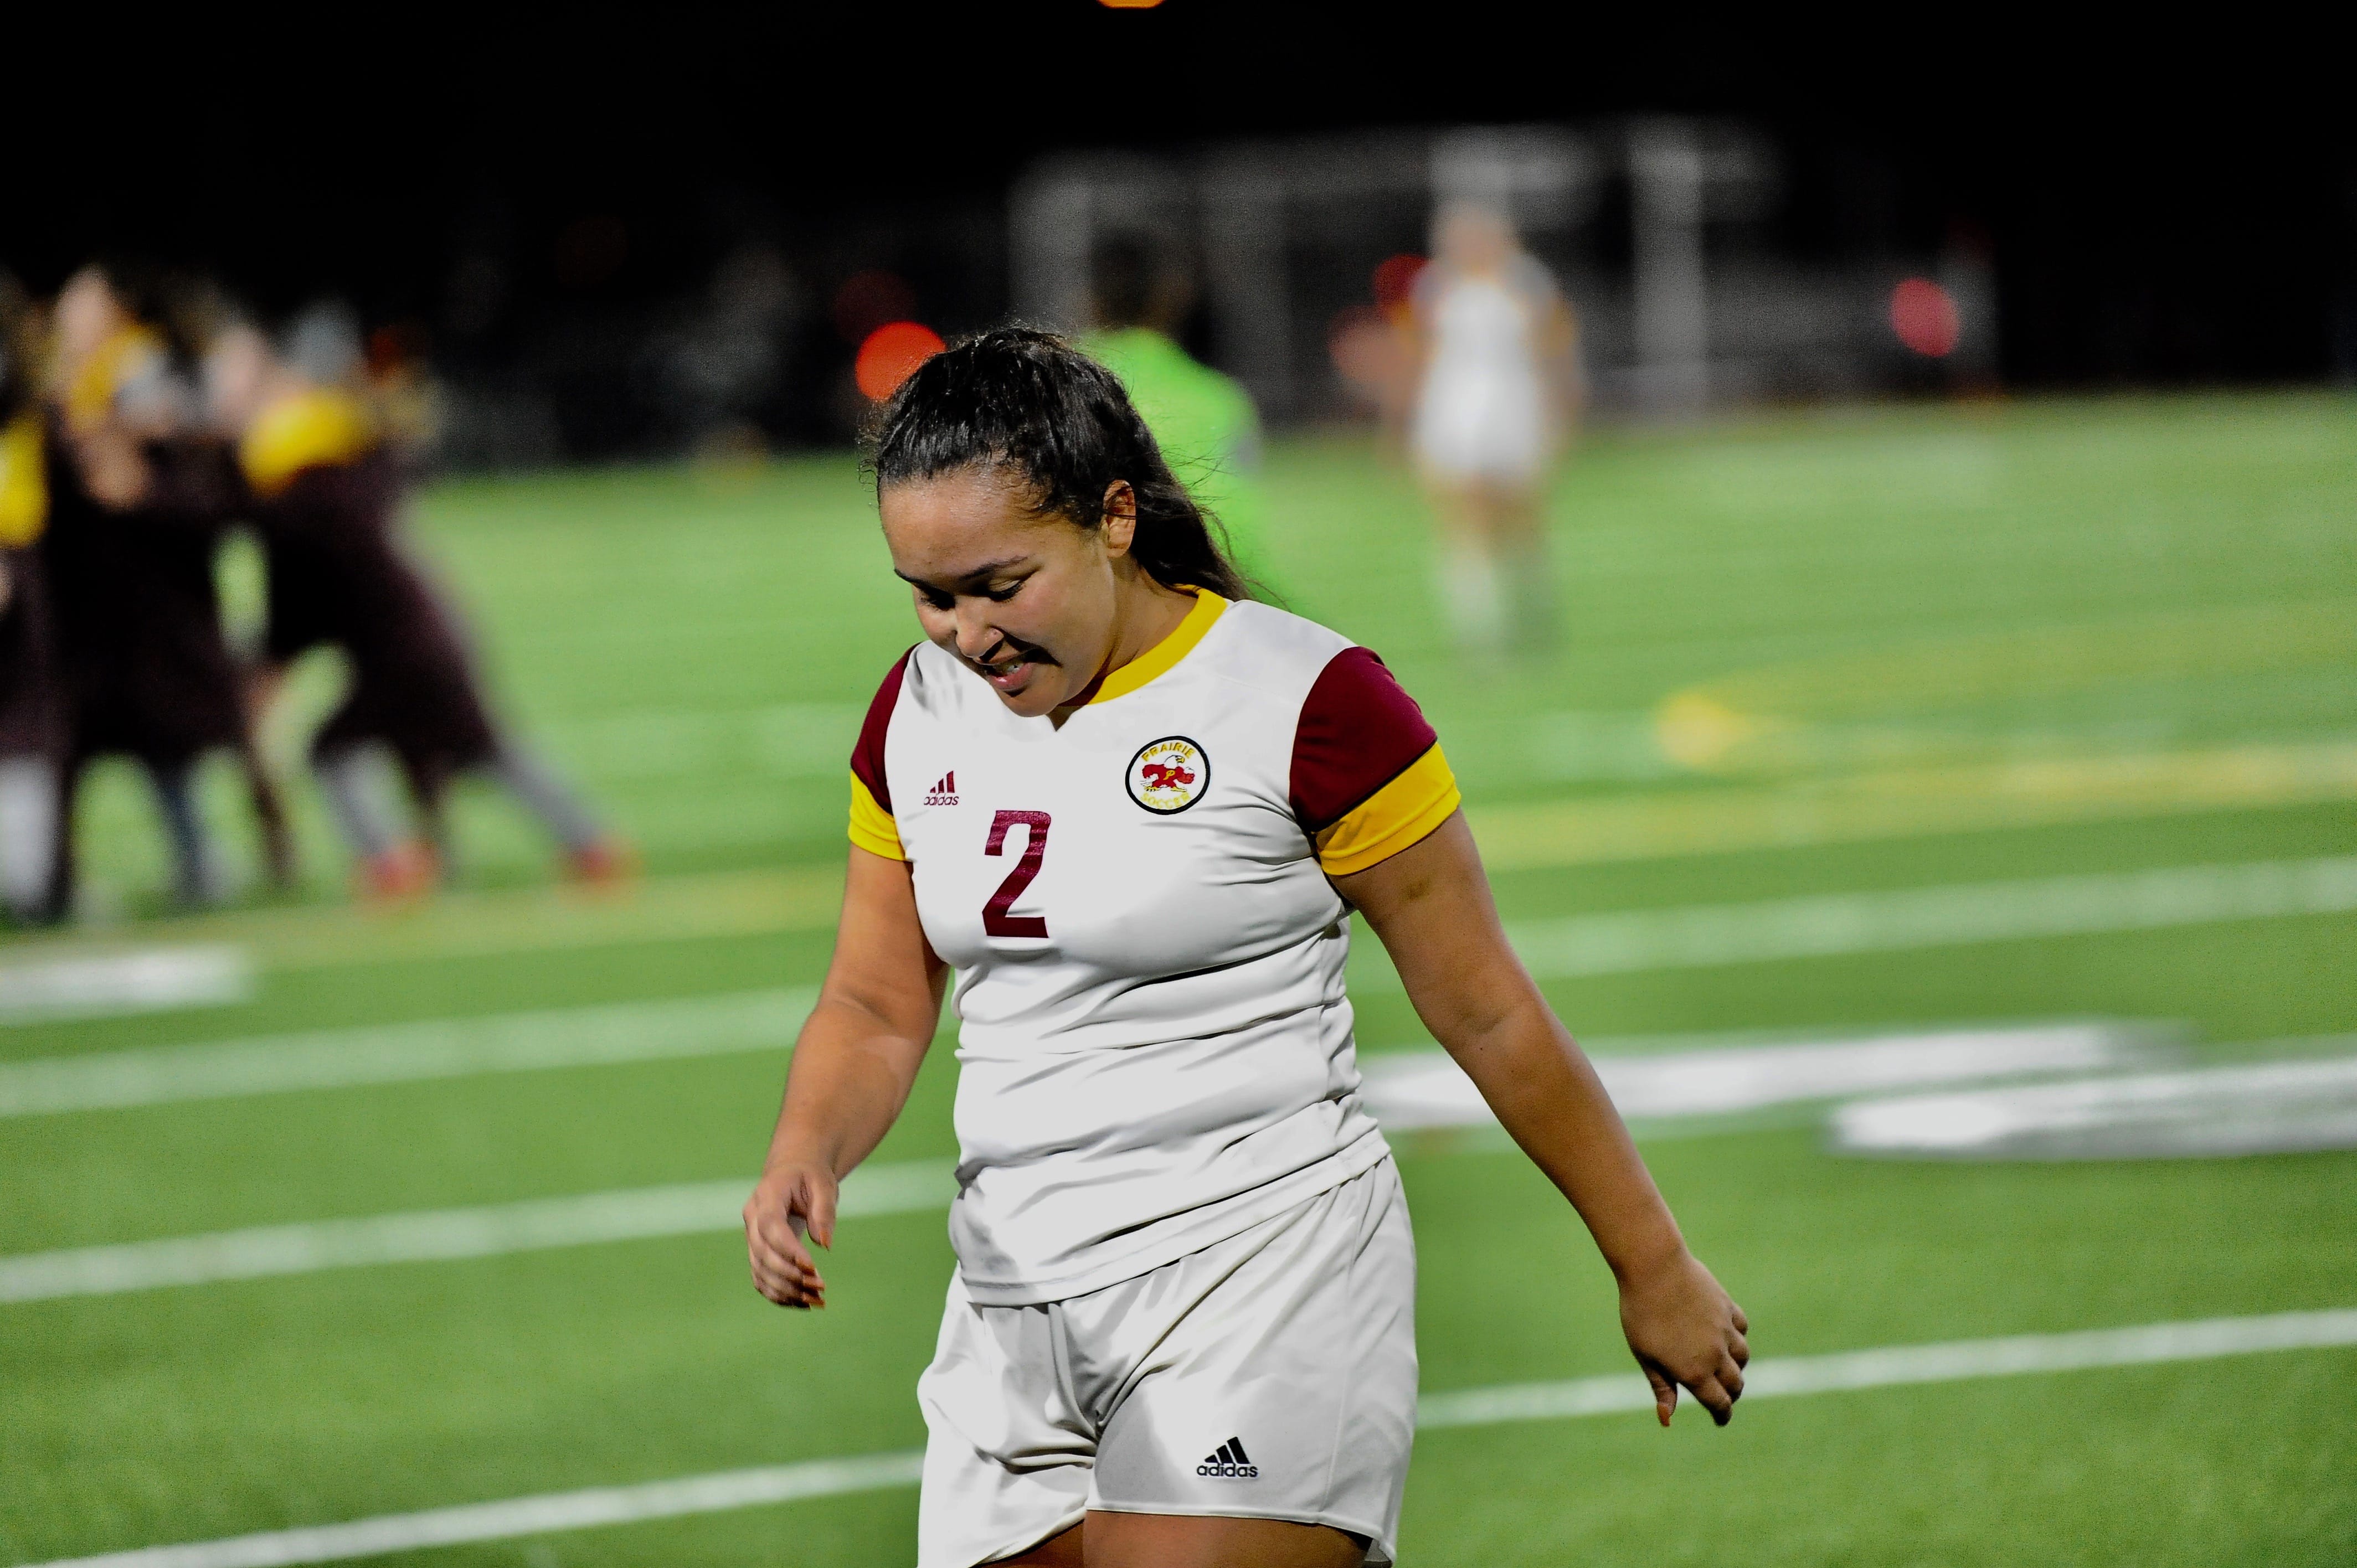 Prairie senior midfielder Malaika Quigley walks off the field at Sparks Stadium in Puyallup moments after the final whistle in a 3-1 loss to Holy Names in the 3A state semifinals.